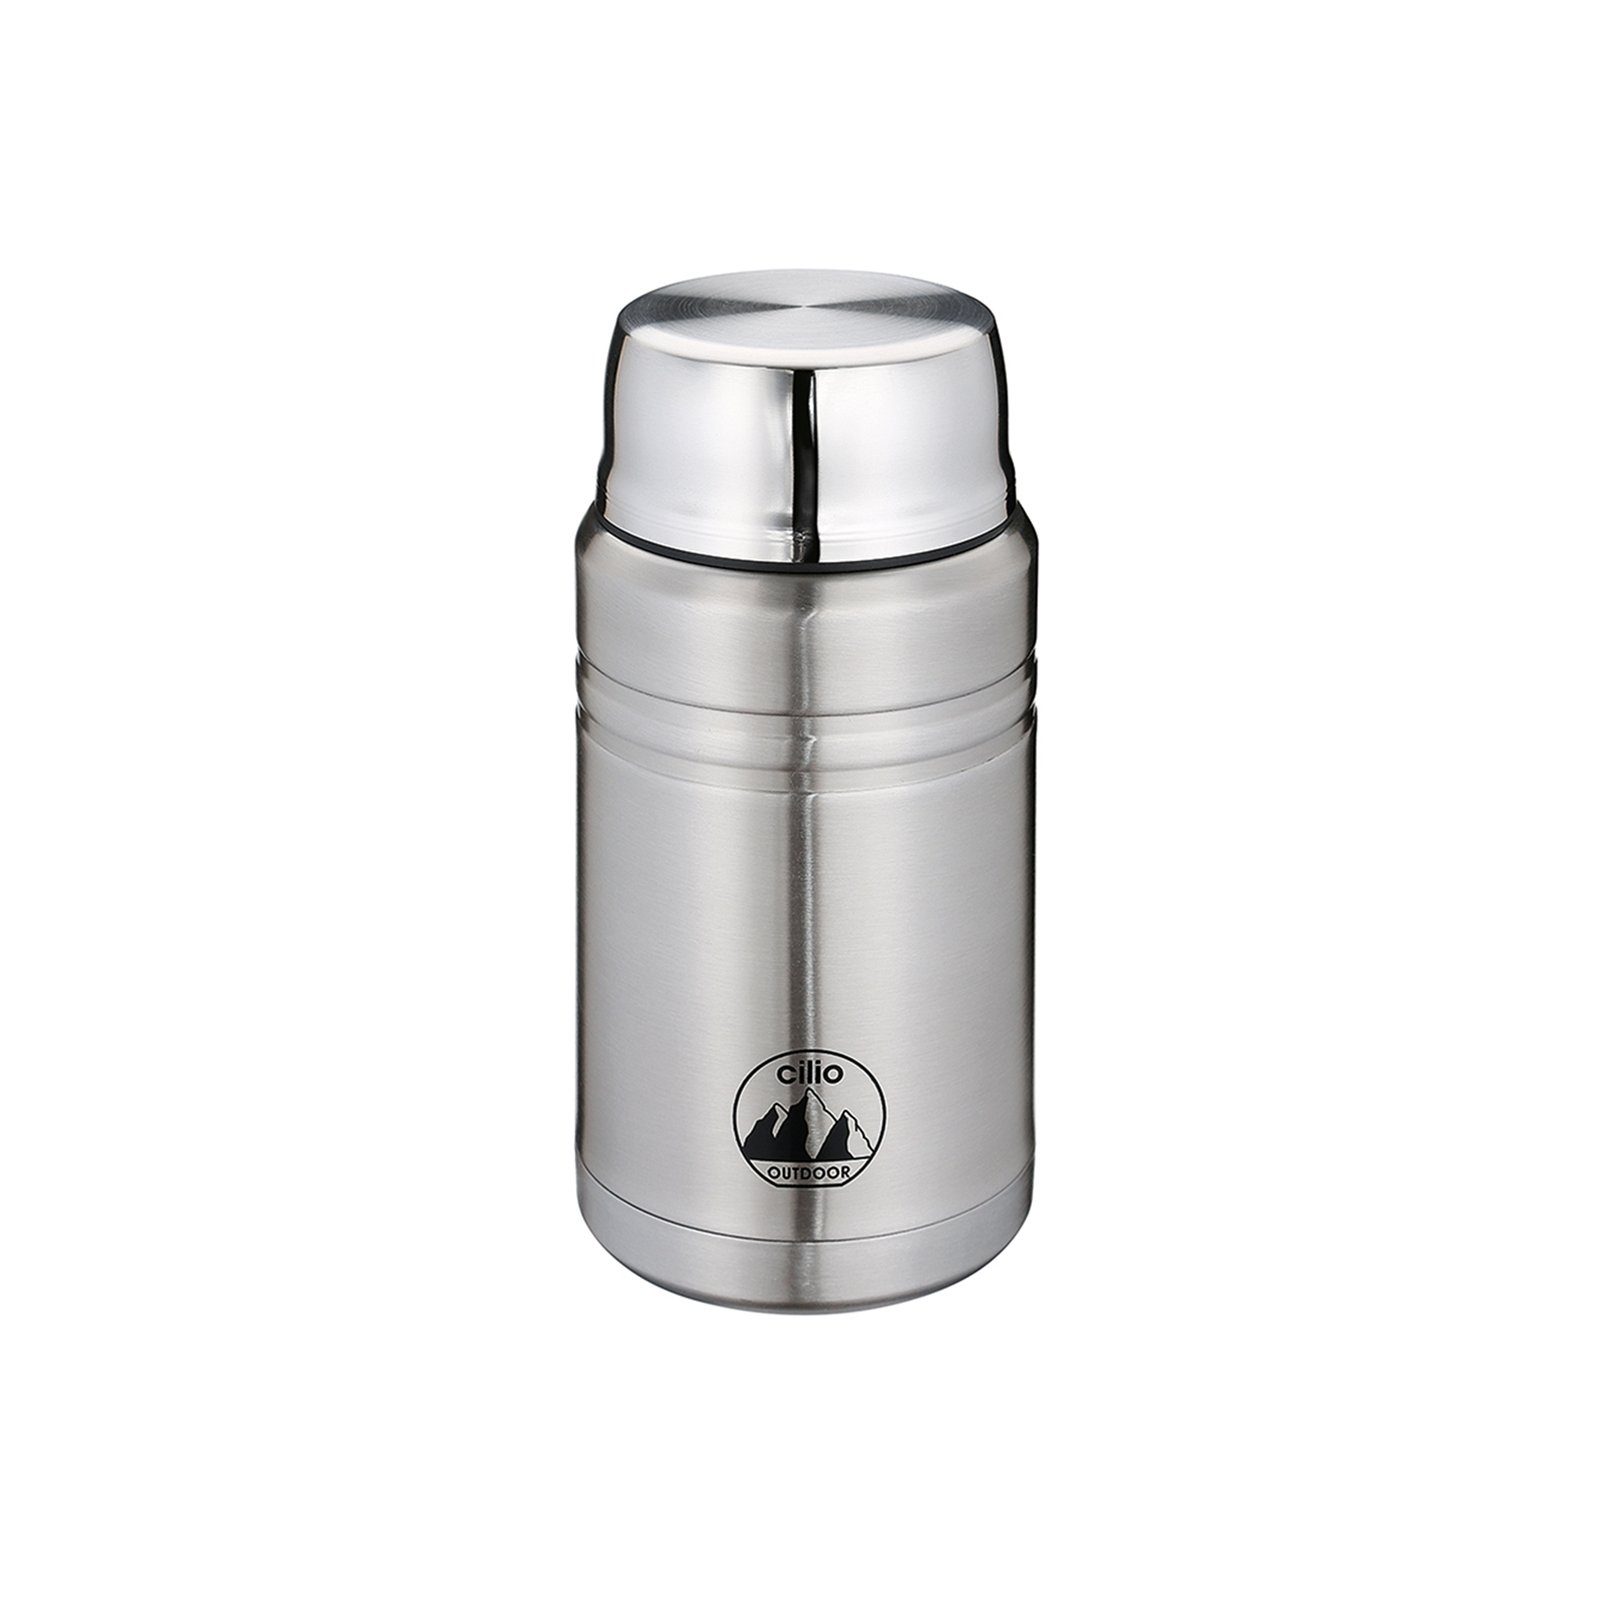 Cilio Thermobehälter Food Container MONTE 750 ml, Edelstahl, (2-tlg) Silber